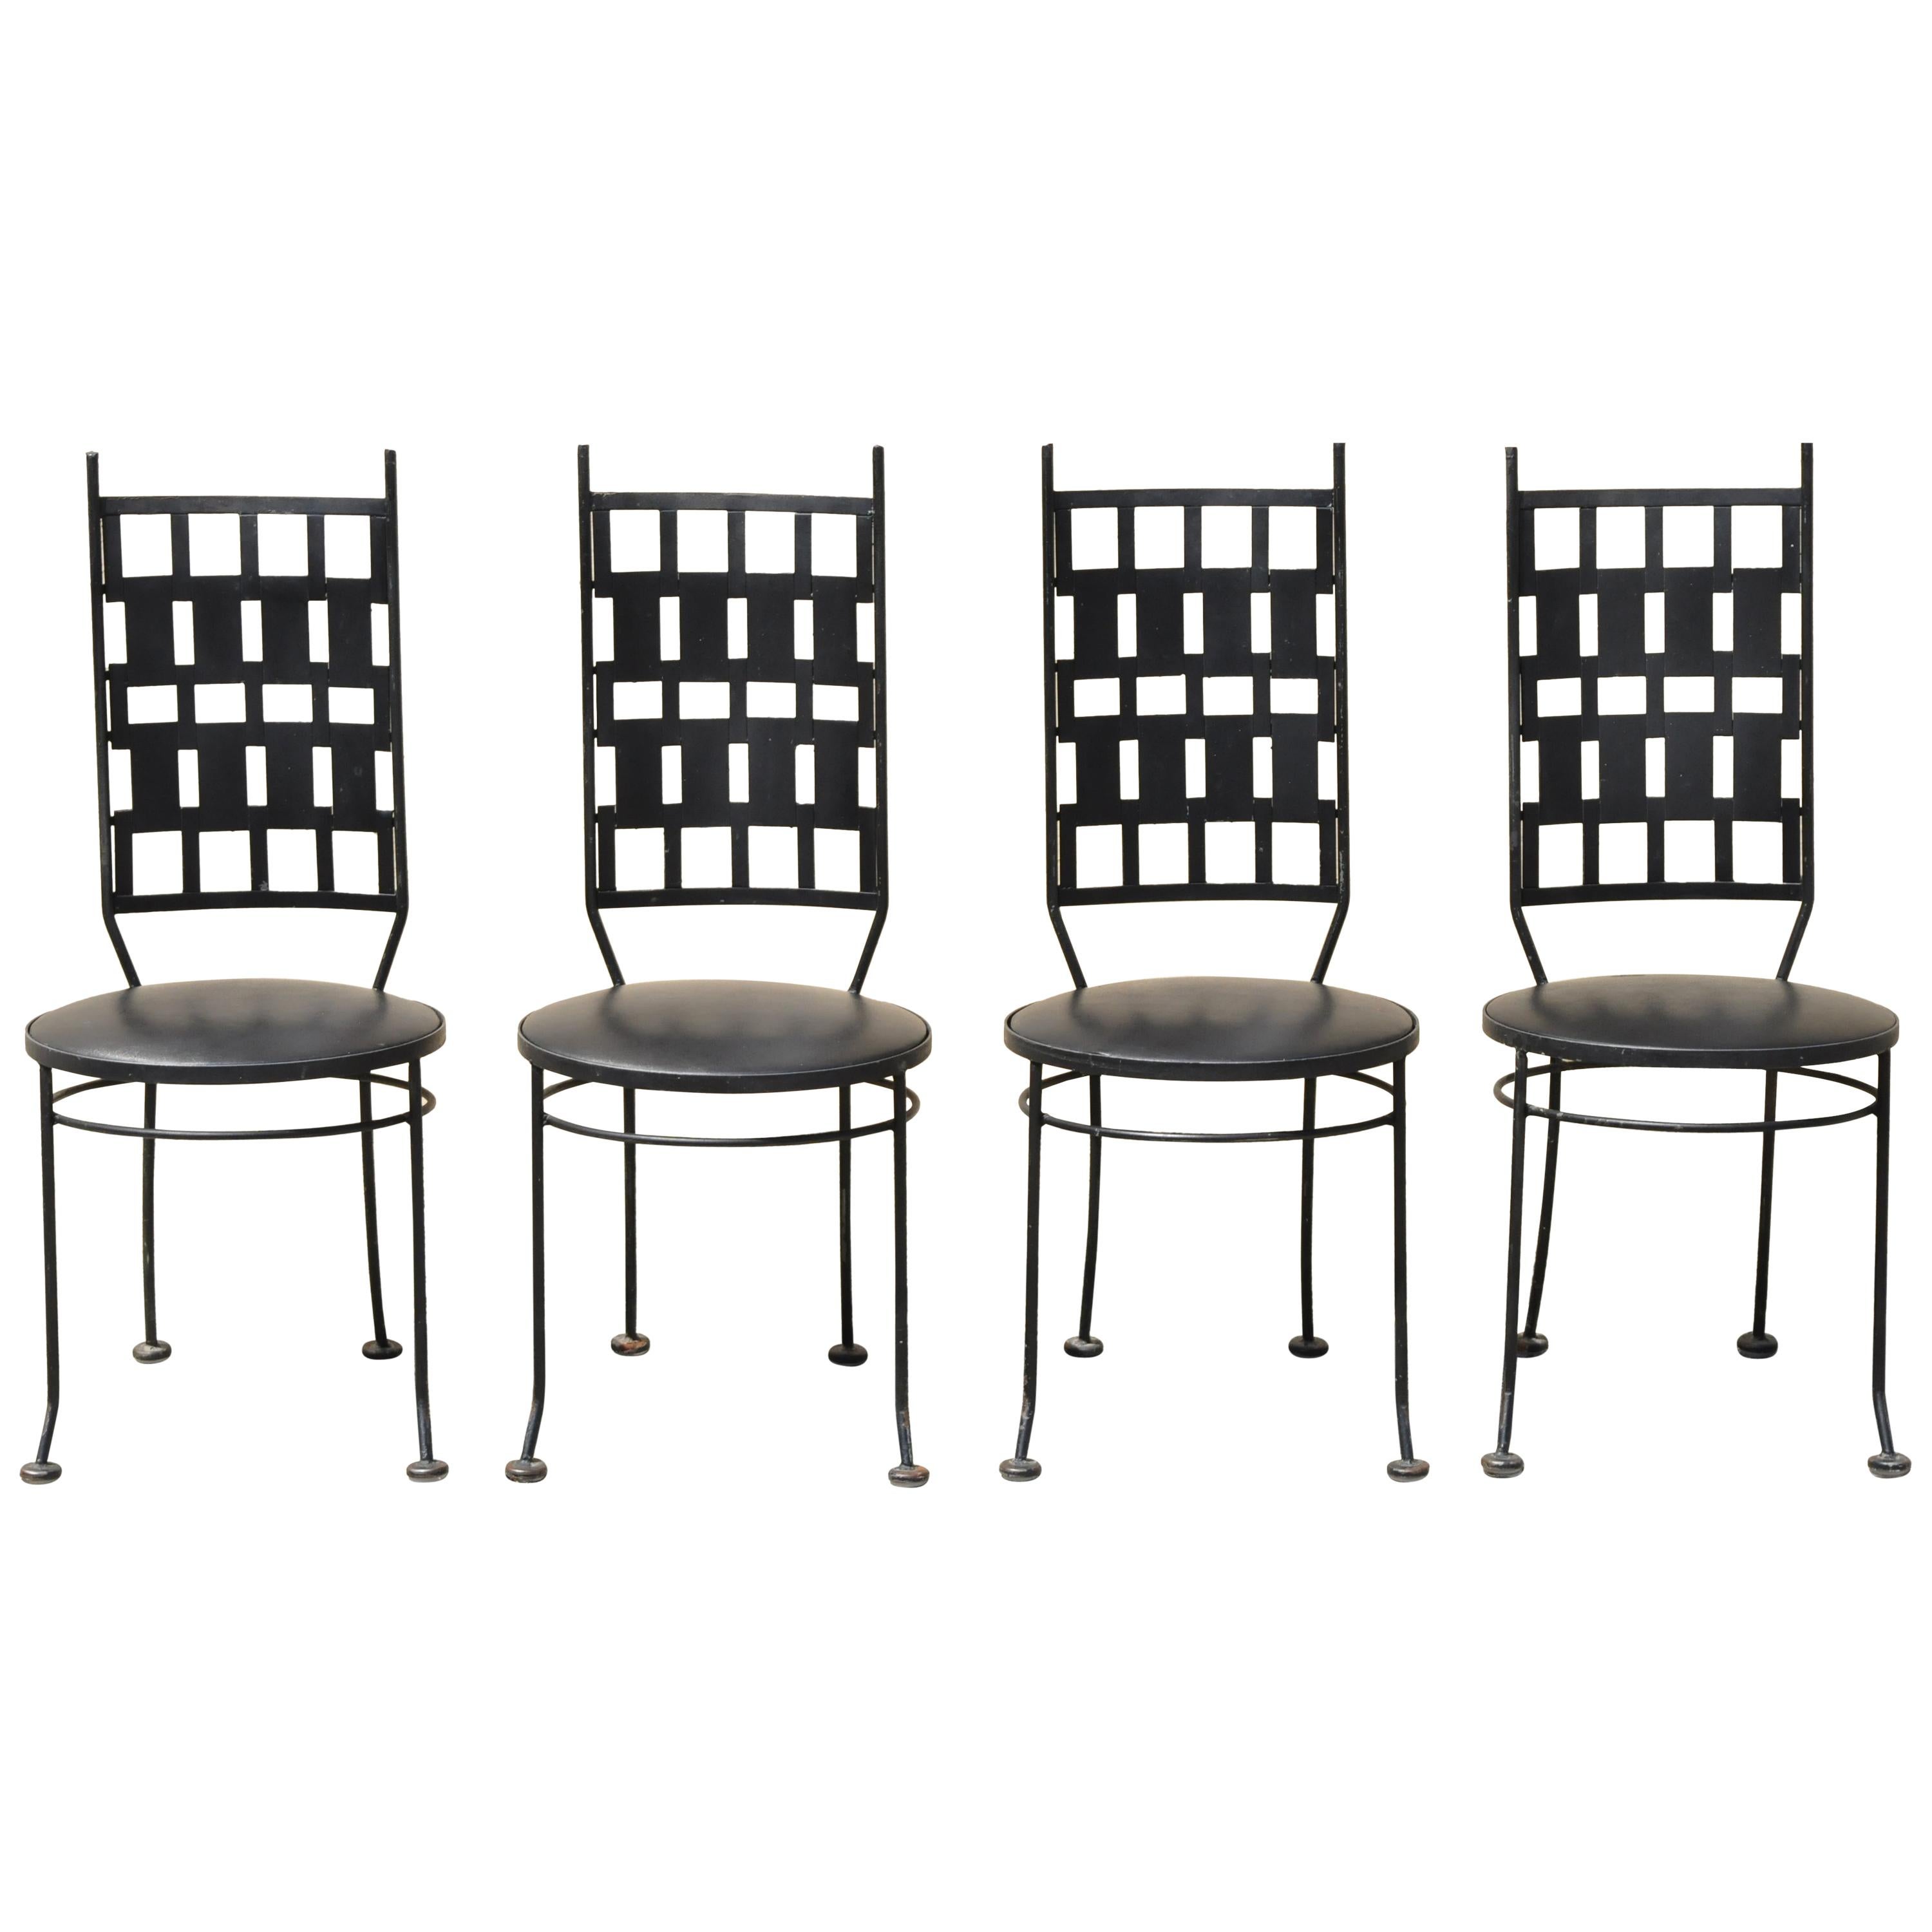 Vintage Wrought Iron Atomic Era Mid-Century Modern Dining Chairs, Set of 4 For Sale